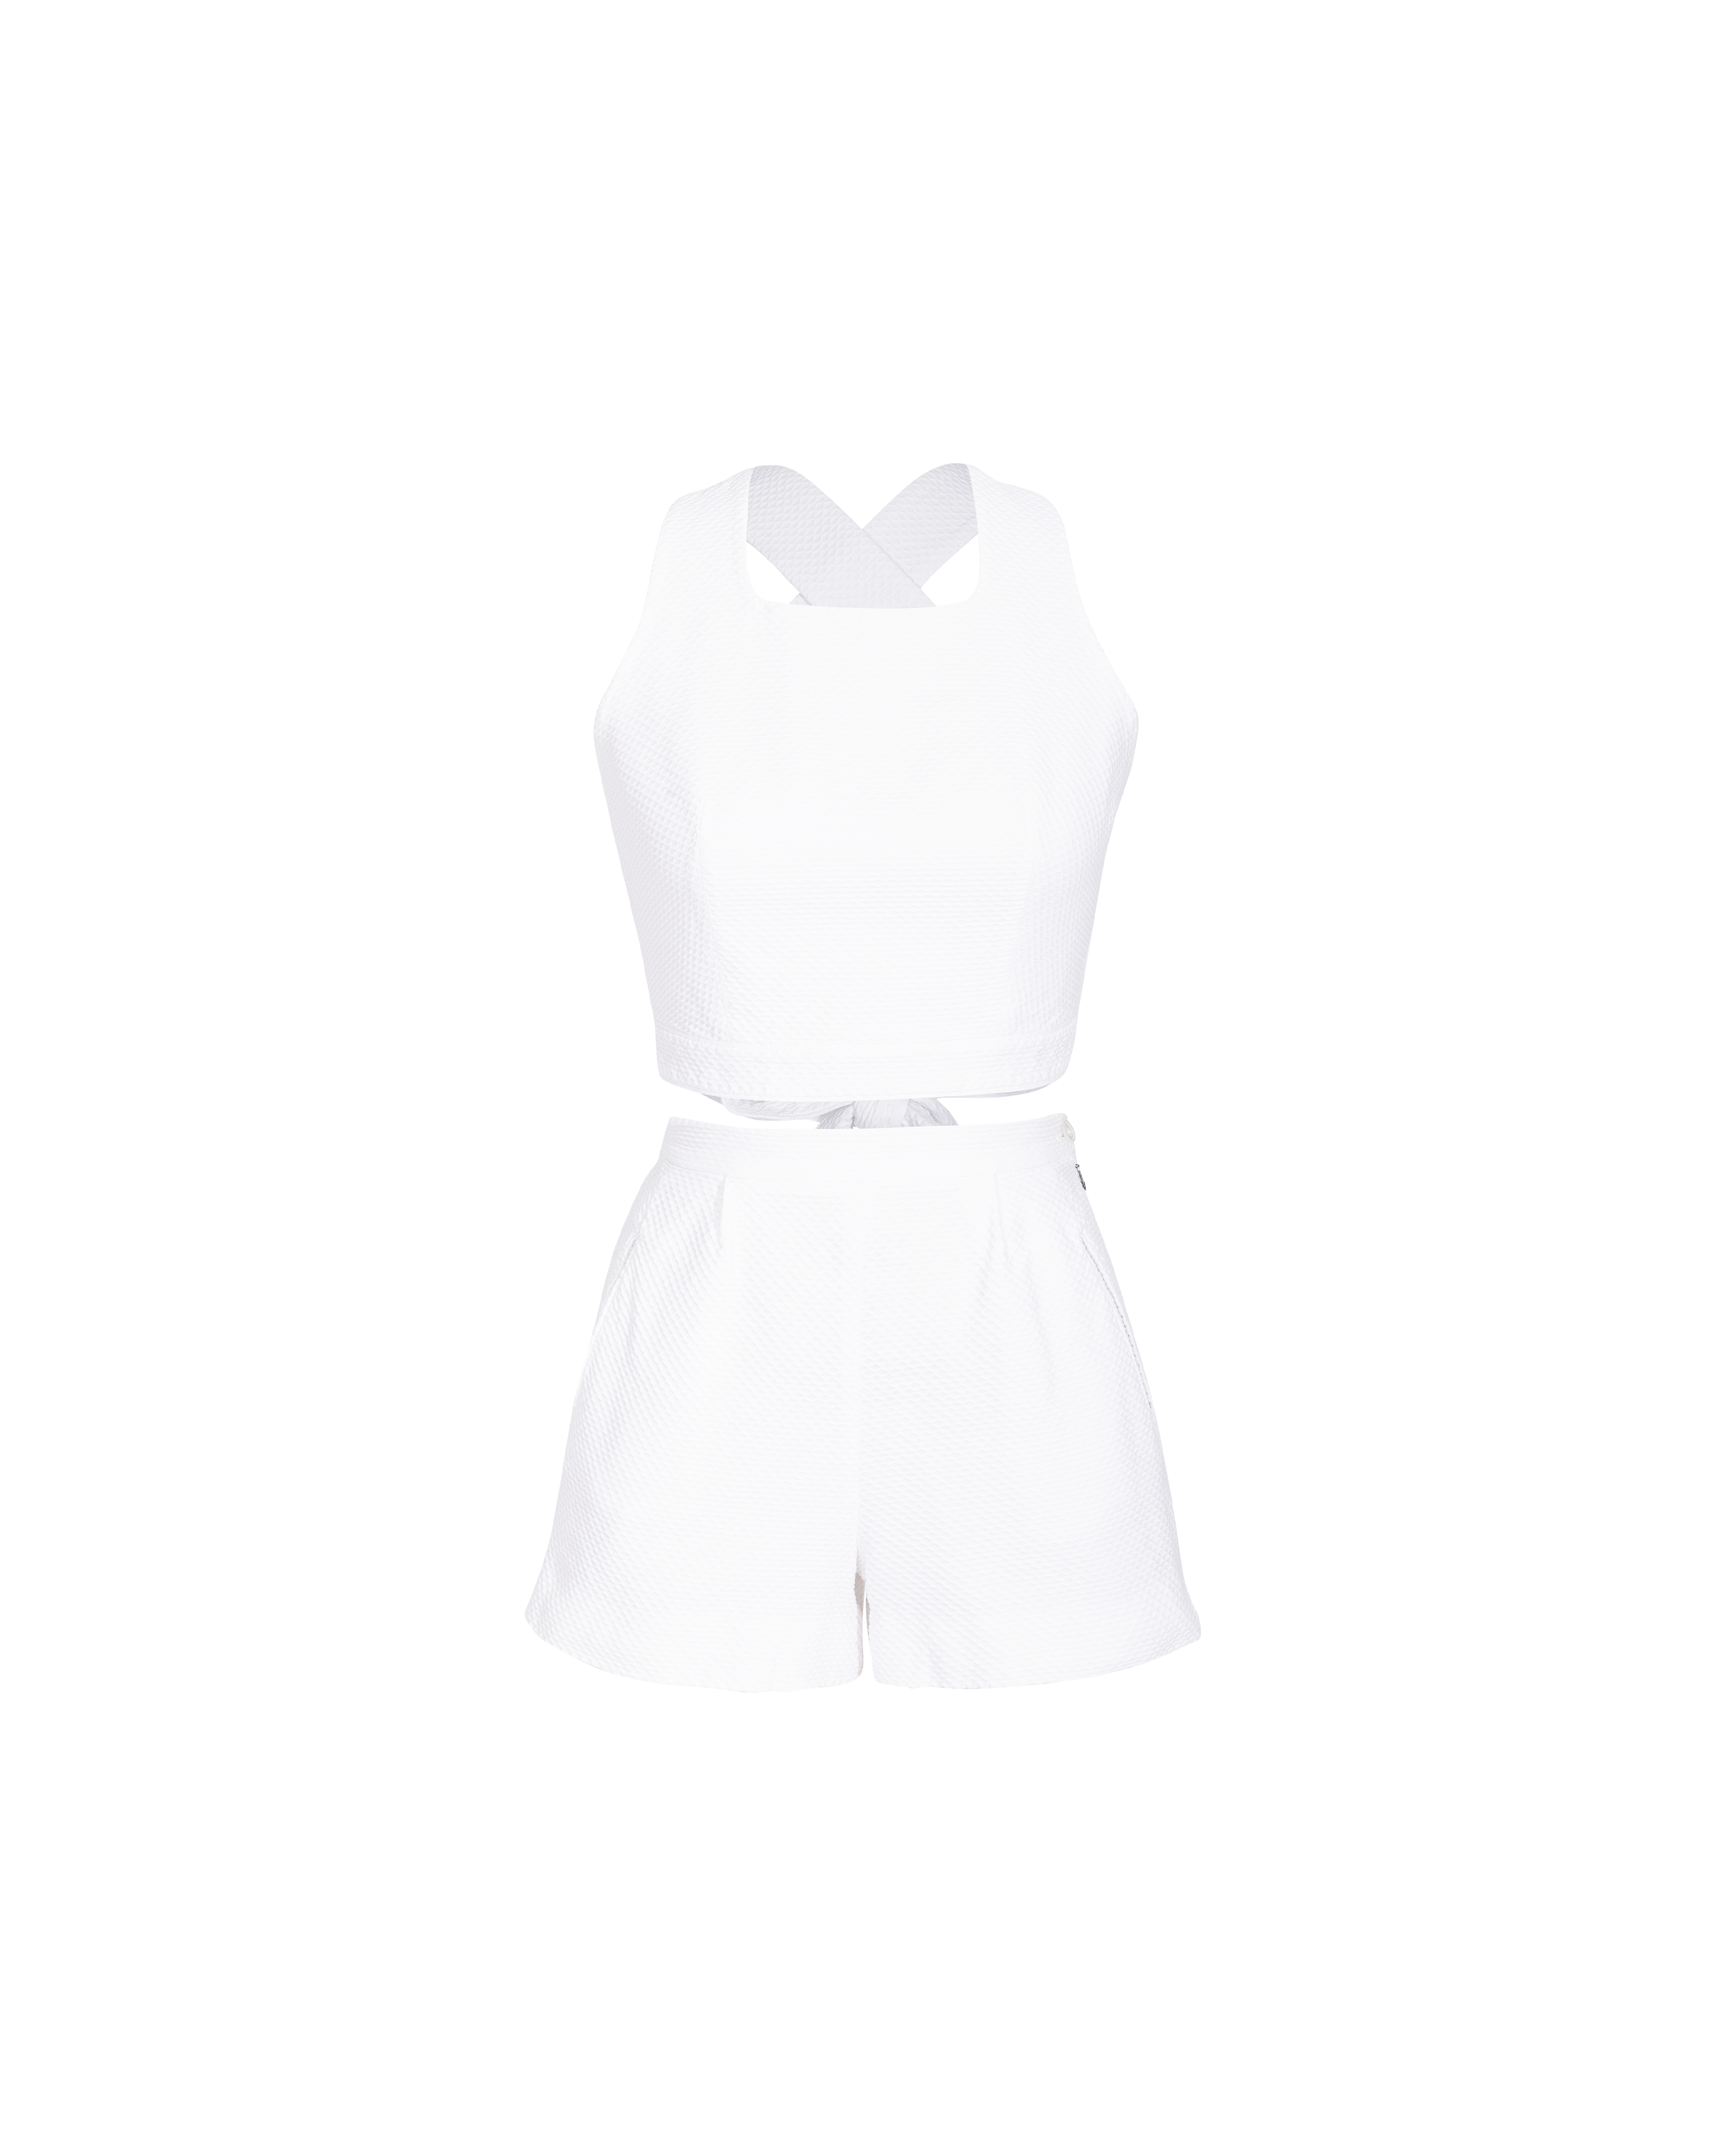 S/S 1992 White Crop Top and Hotpants Set